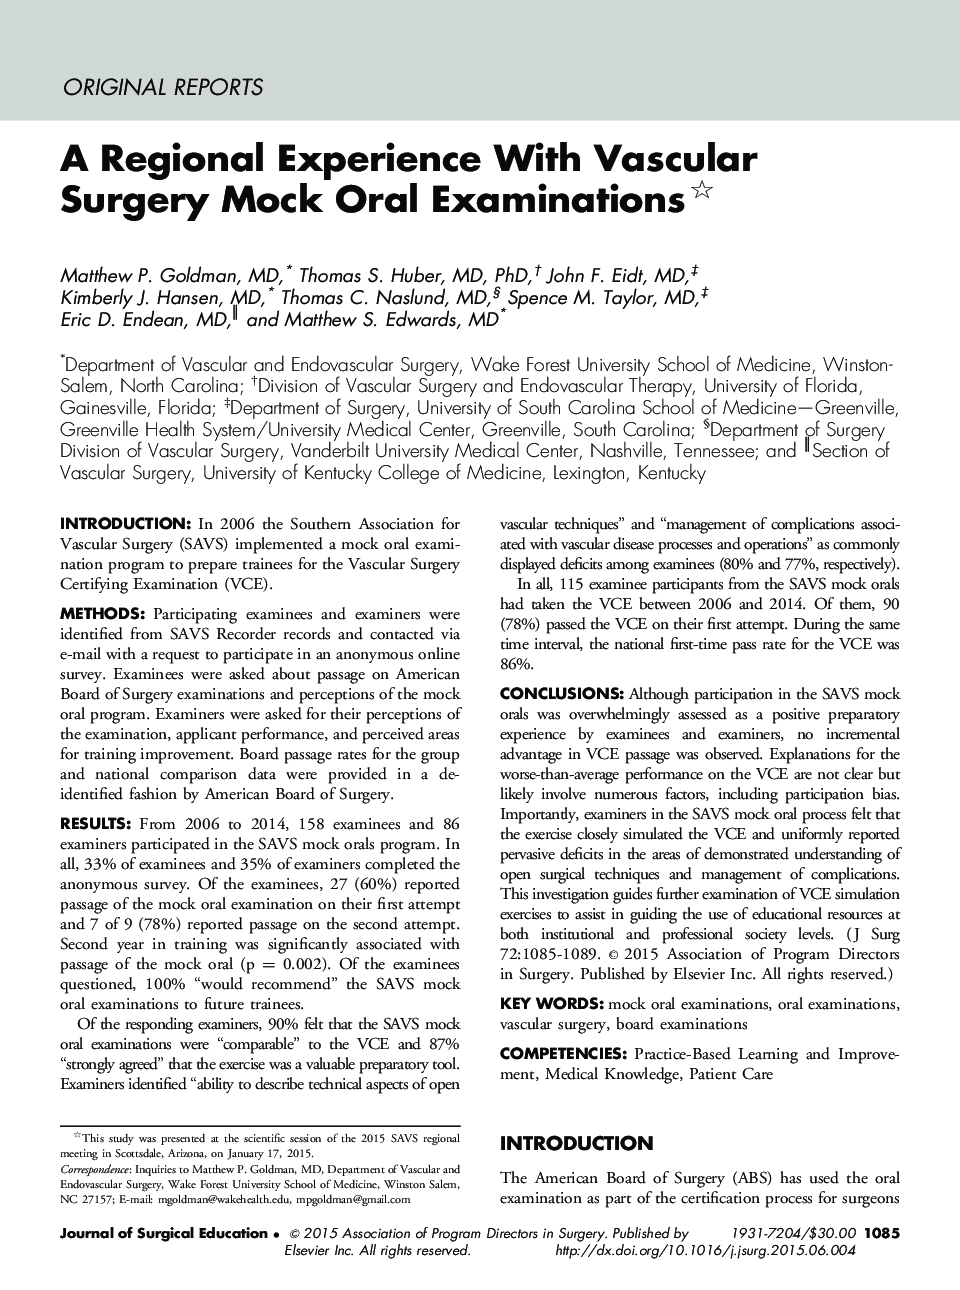 A Regional Experience With Vascular Surgery Mock Oral Examinations 